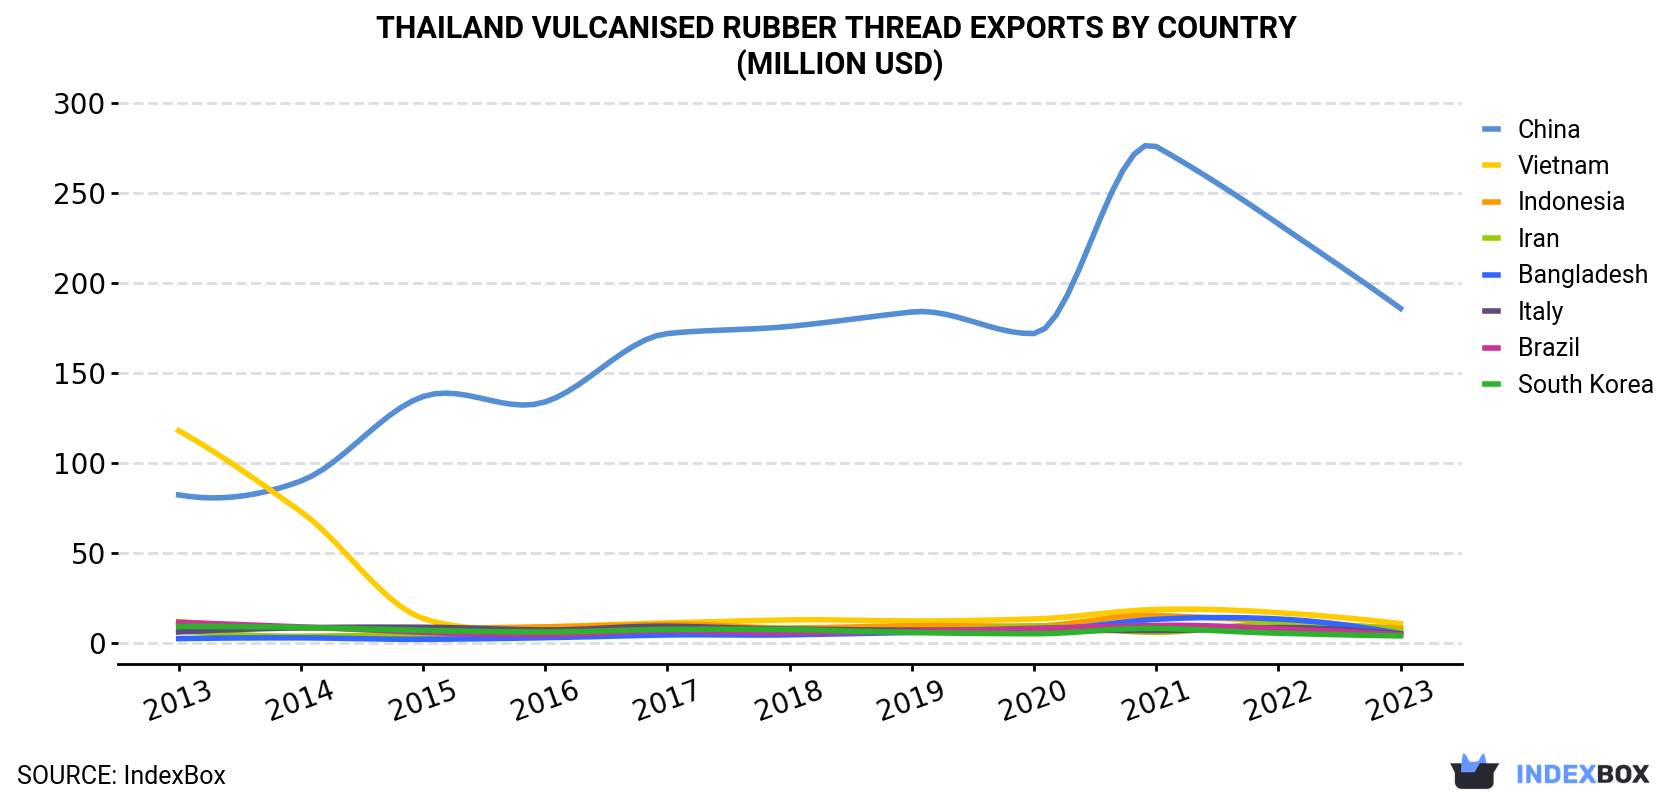 Thailand Vulcanised Rubber Thread Exports By Country (Million USD)